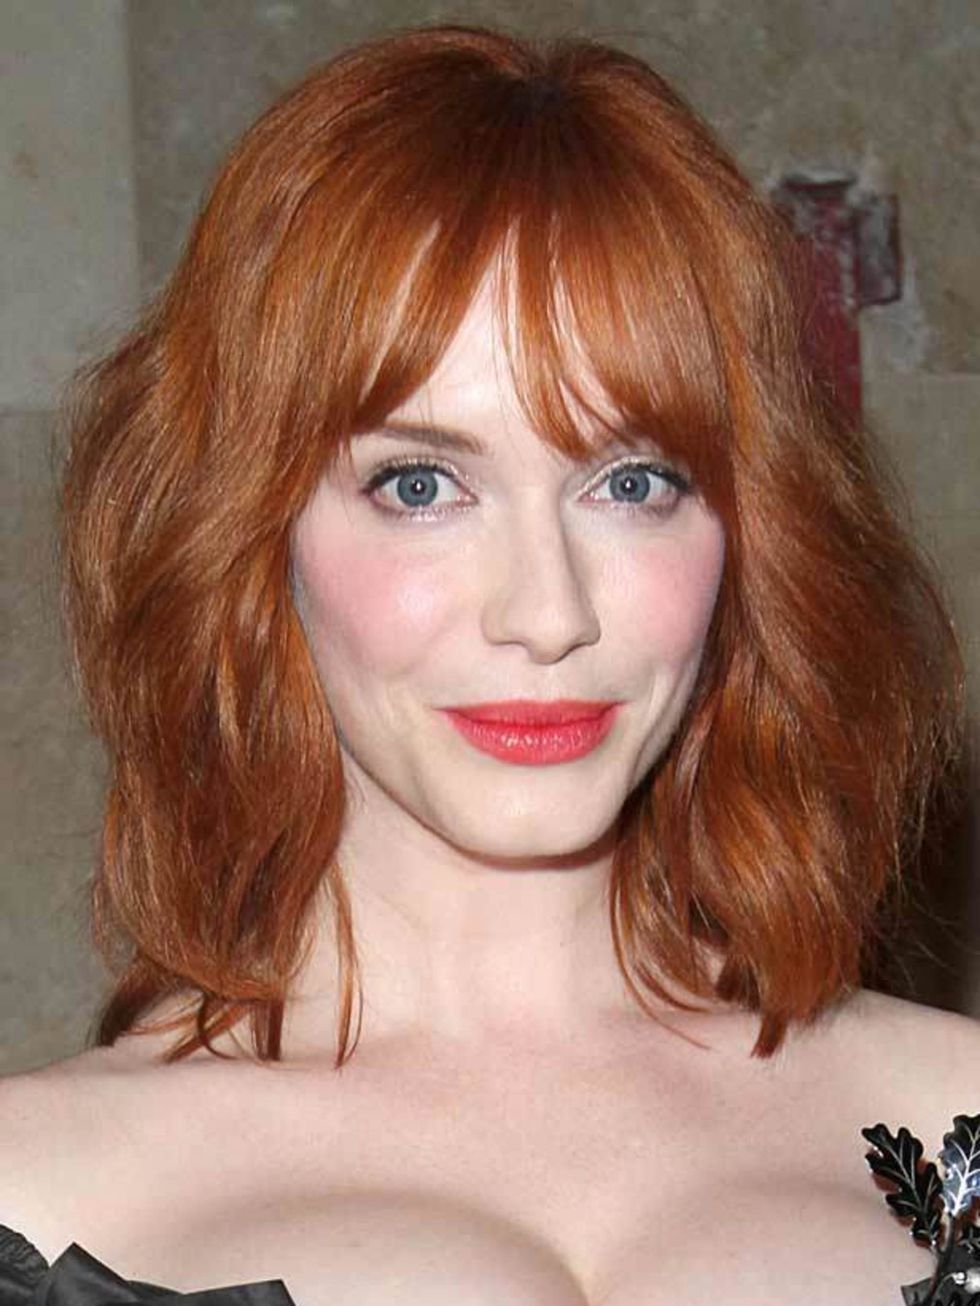 <p><a href="http://www.elleuk.com/starstyle/style-files/%28section%29/christina-hendricks/">See Christina's best looks here...</a></p>